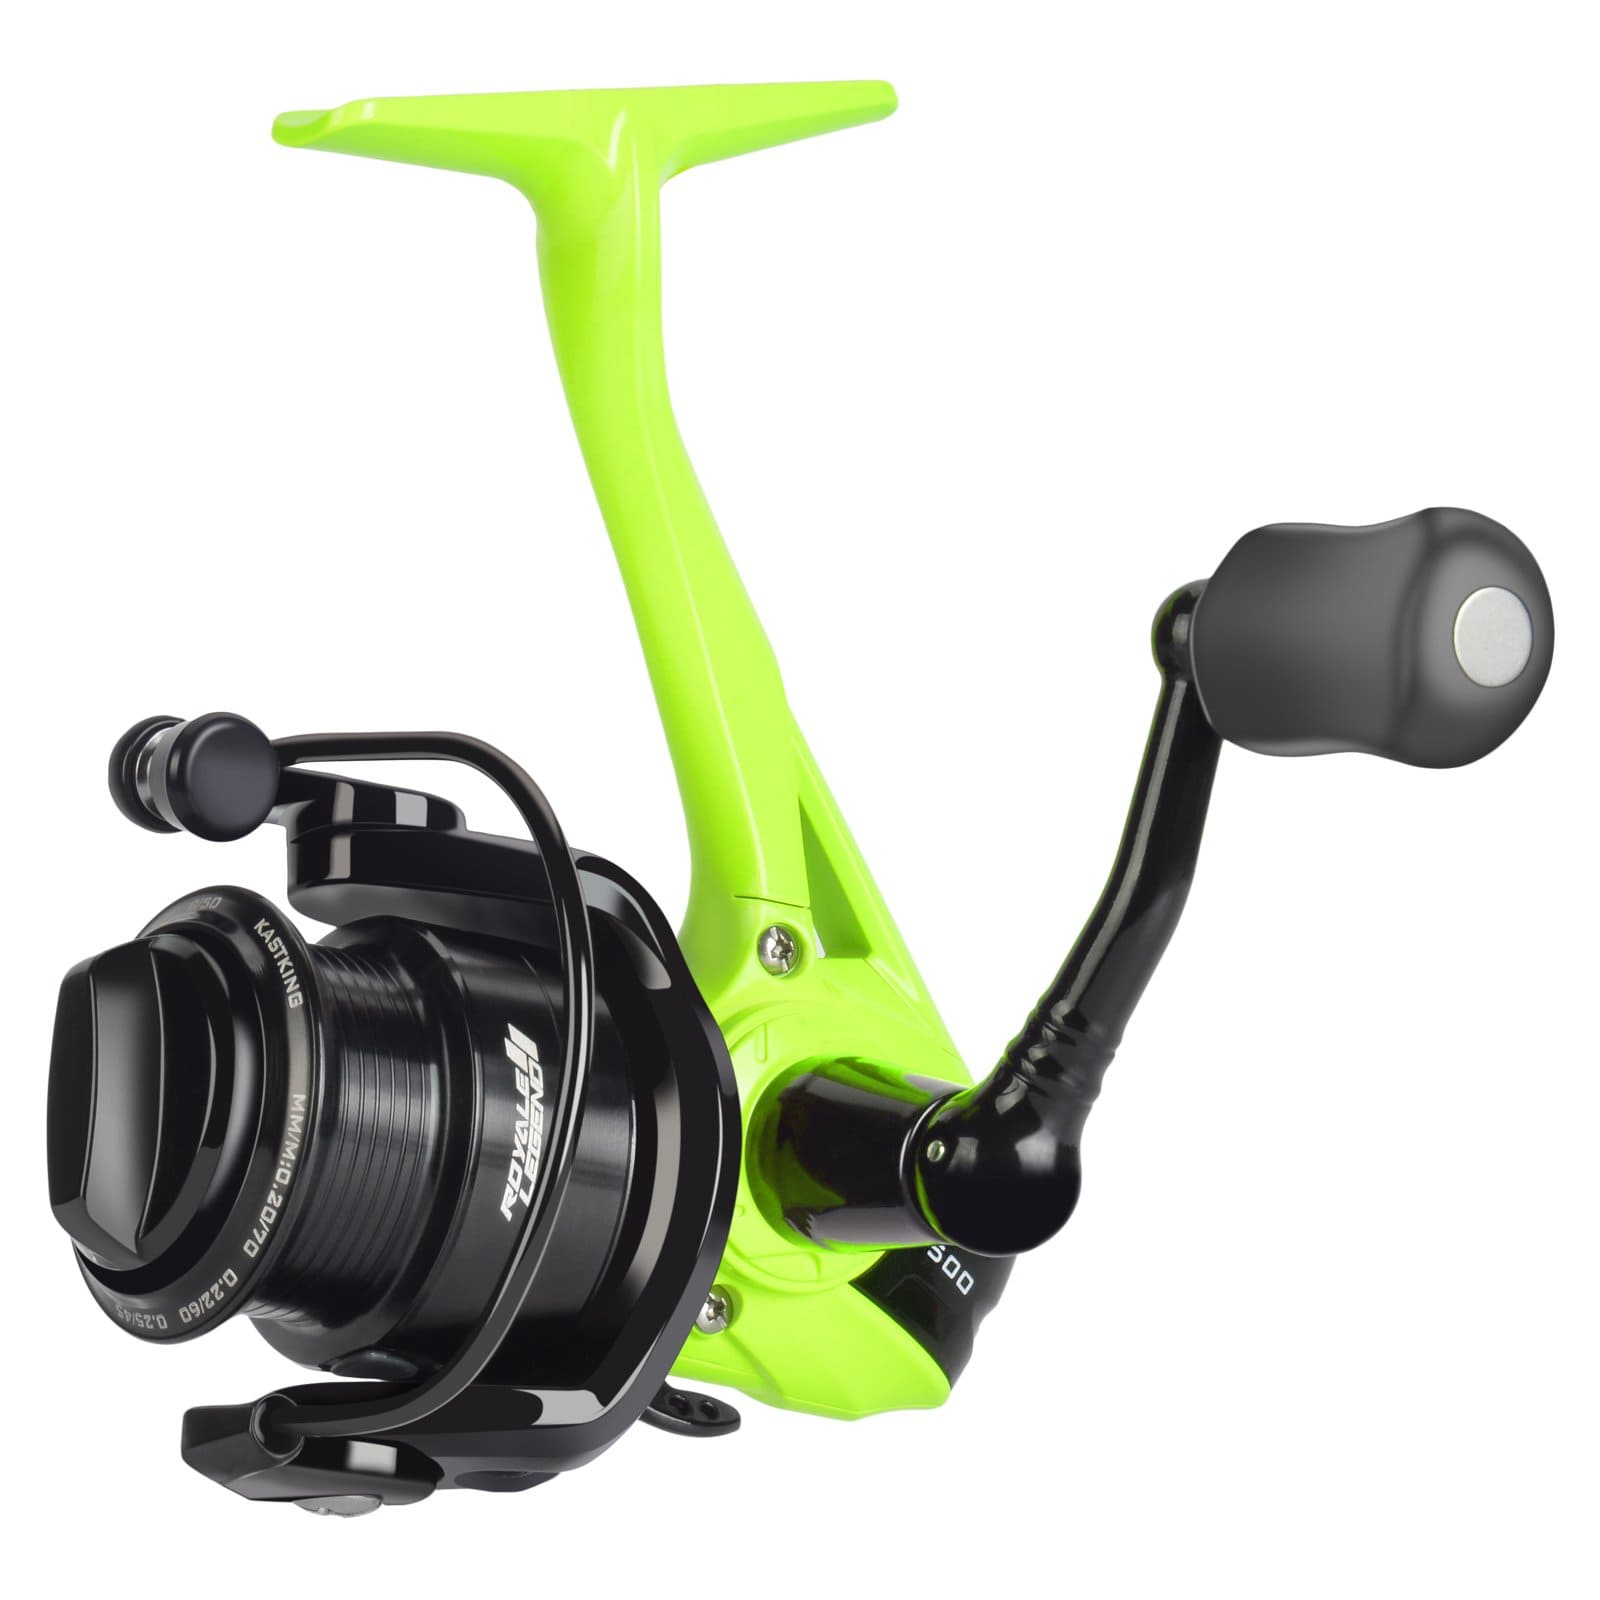 Shop Kastking Ultralight Fishing Reel with great discounts and